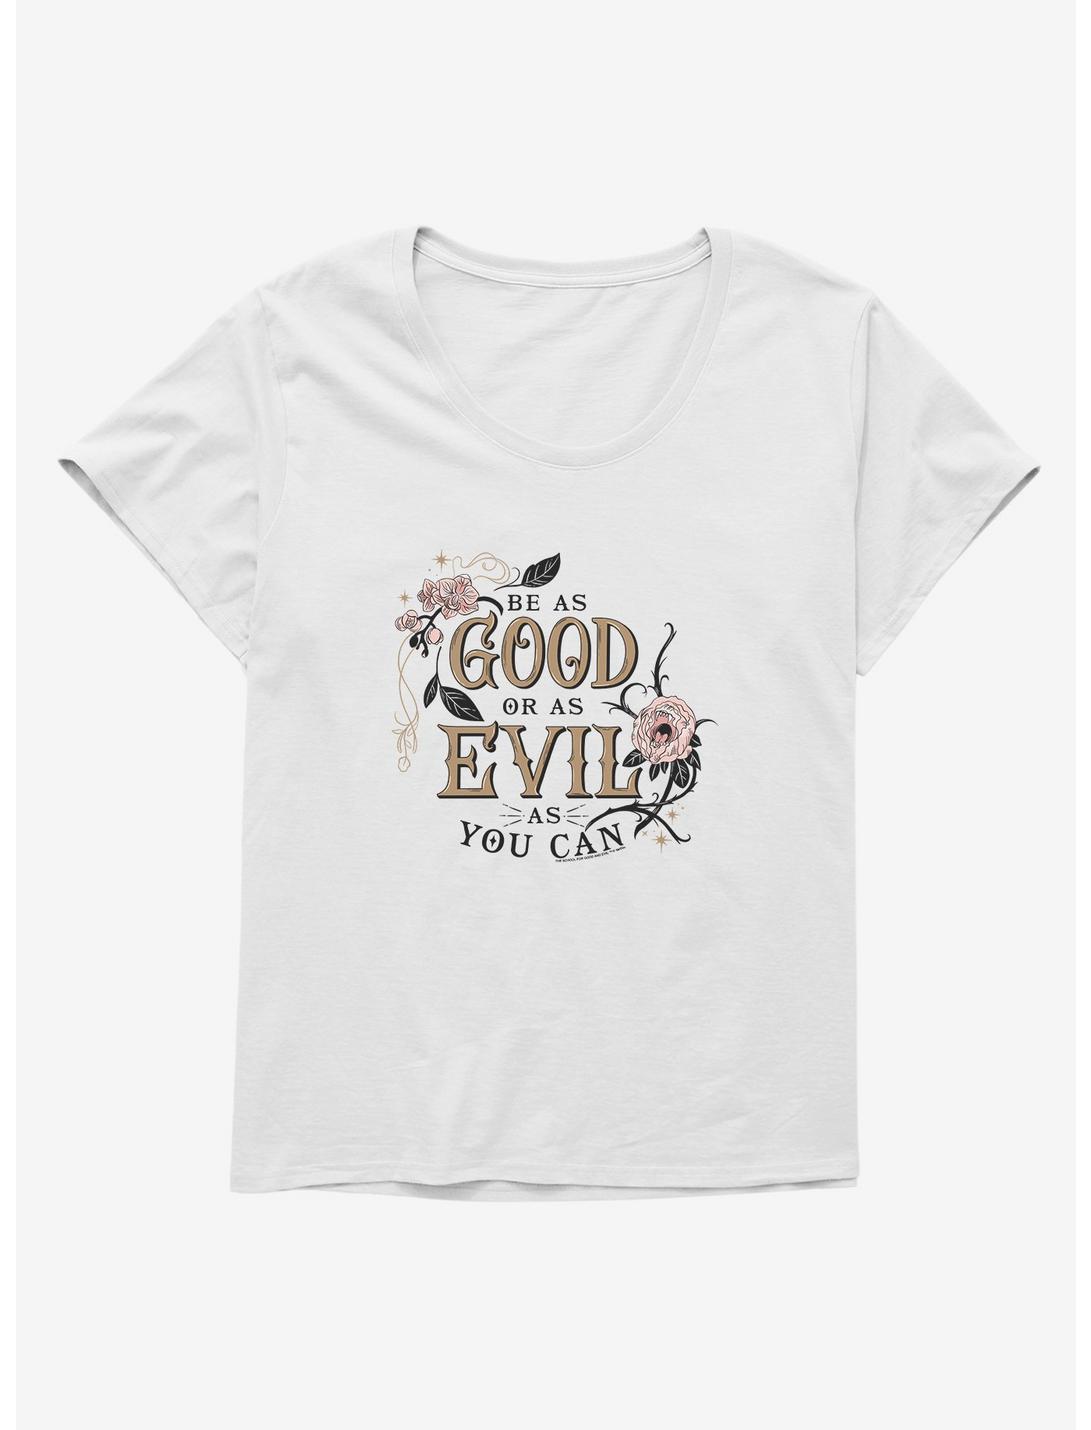 The School For Good And Evil Be As Good or Evil Girls T-Shirt Plus Size, WHITE, hi-res